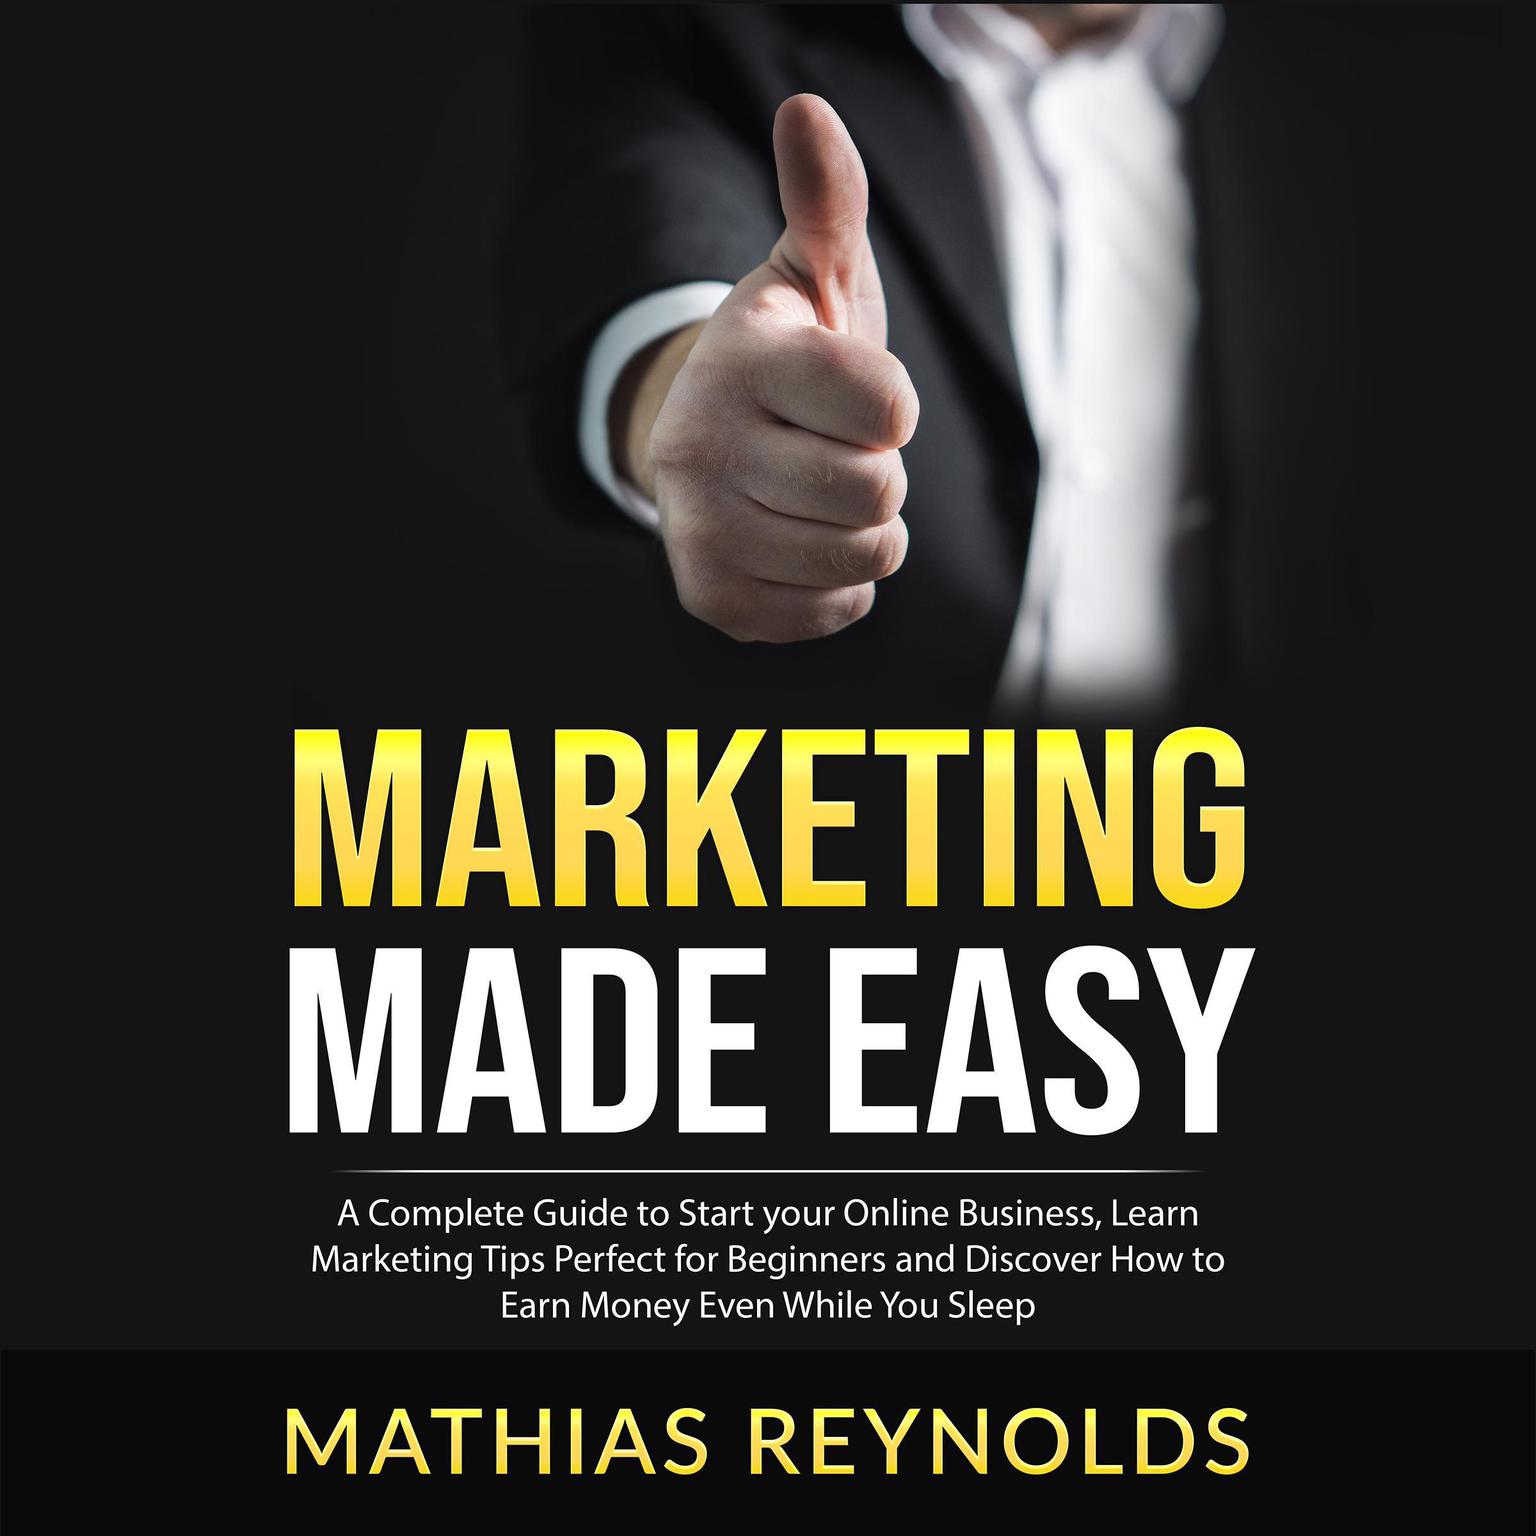 Marketing Made Easy: A Complete Guide to Start your Online Business, Learn Marketing Tips Perfect for Beginners and Discover How to Earn Money Even While You Sleep Audiobook, by Mathias Reynolds